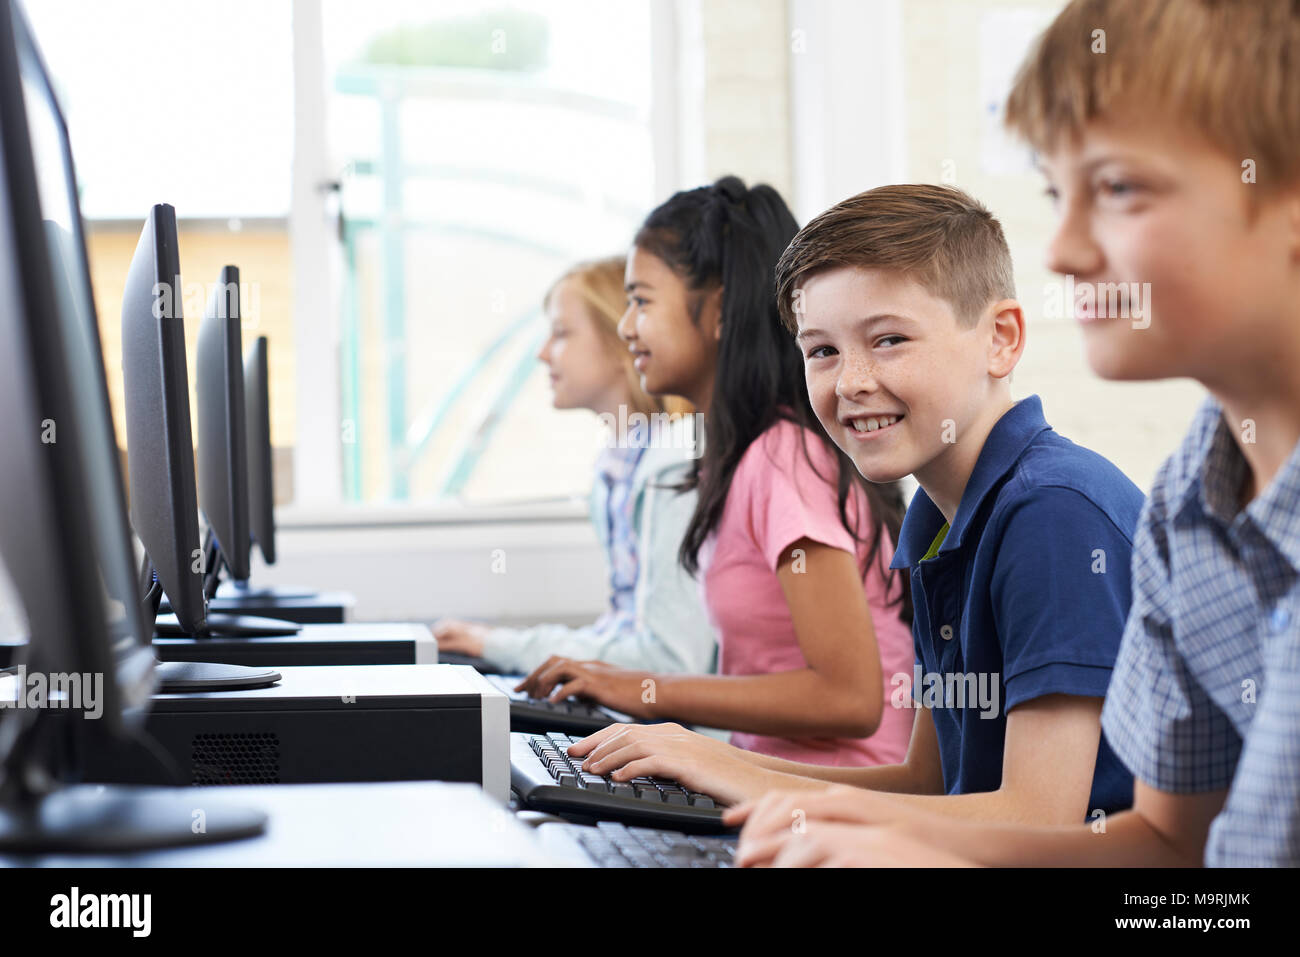 Portrait Of Line Of Elementary Pupils In Computer Class Stock Photo